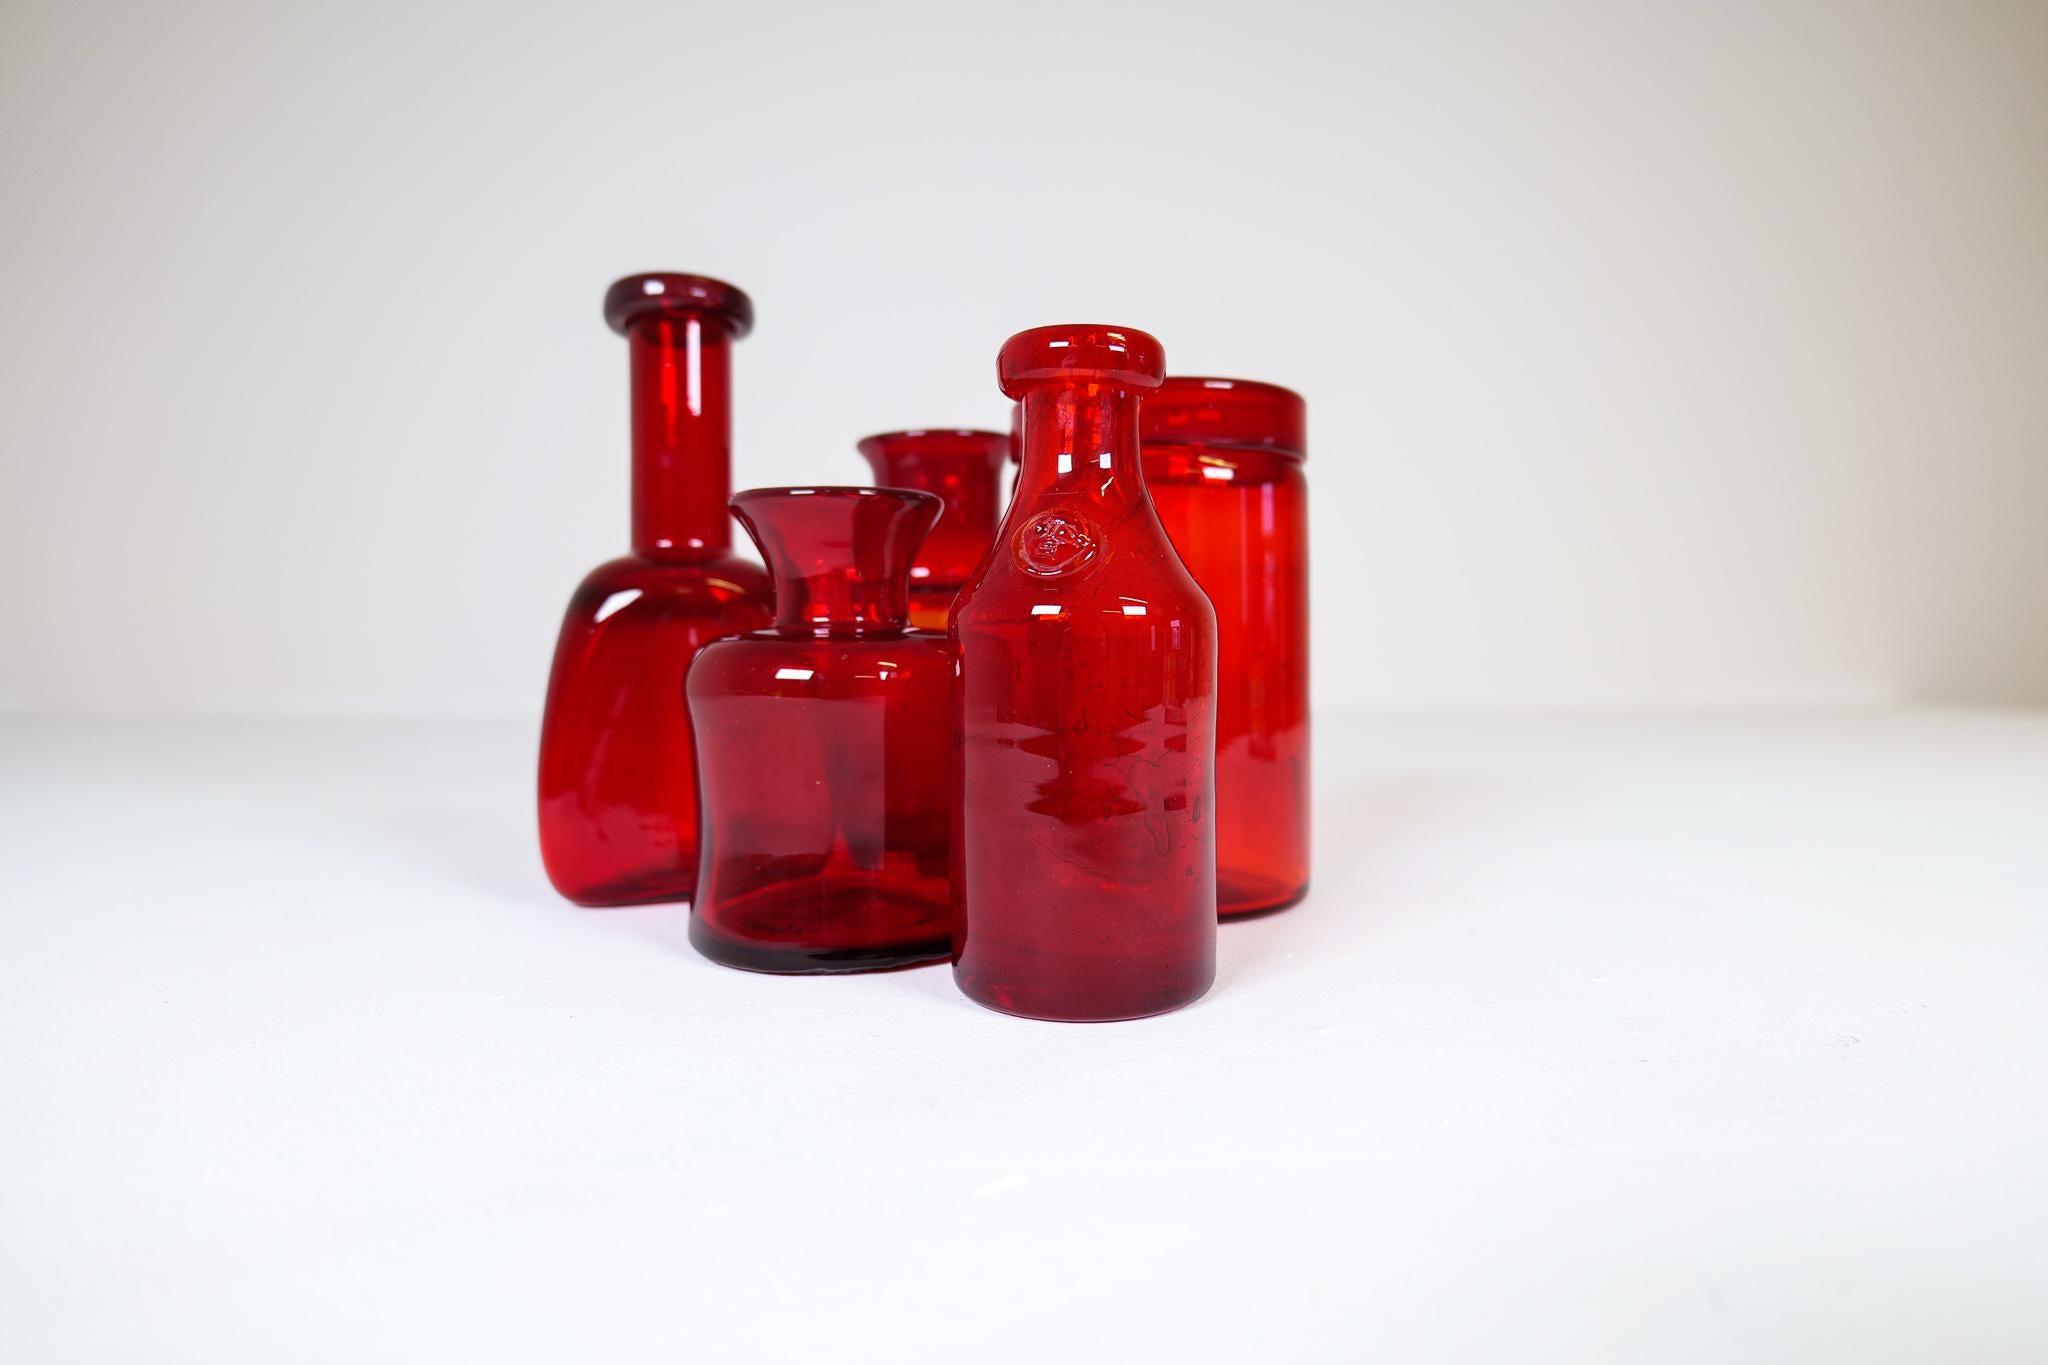 Collection of five rare red glass vases / vessels designed by Erik Höglund. Hand blown at Boda glass hut during the 1960s. They are all different sizes and shapes in very good to excellent condition. They are made in the typical method of Höglund